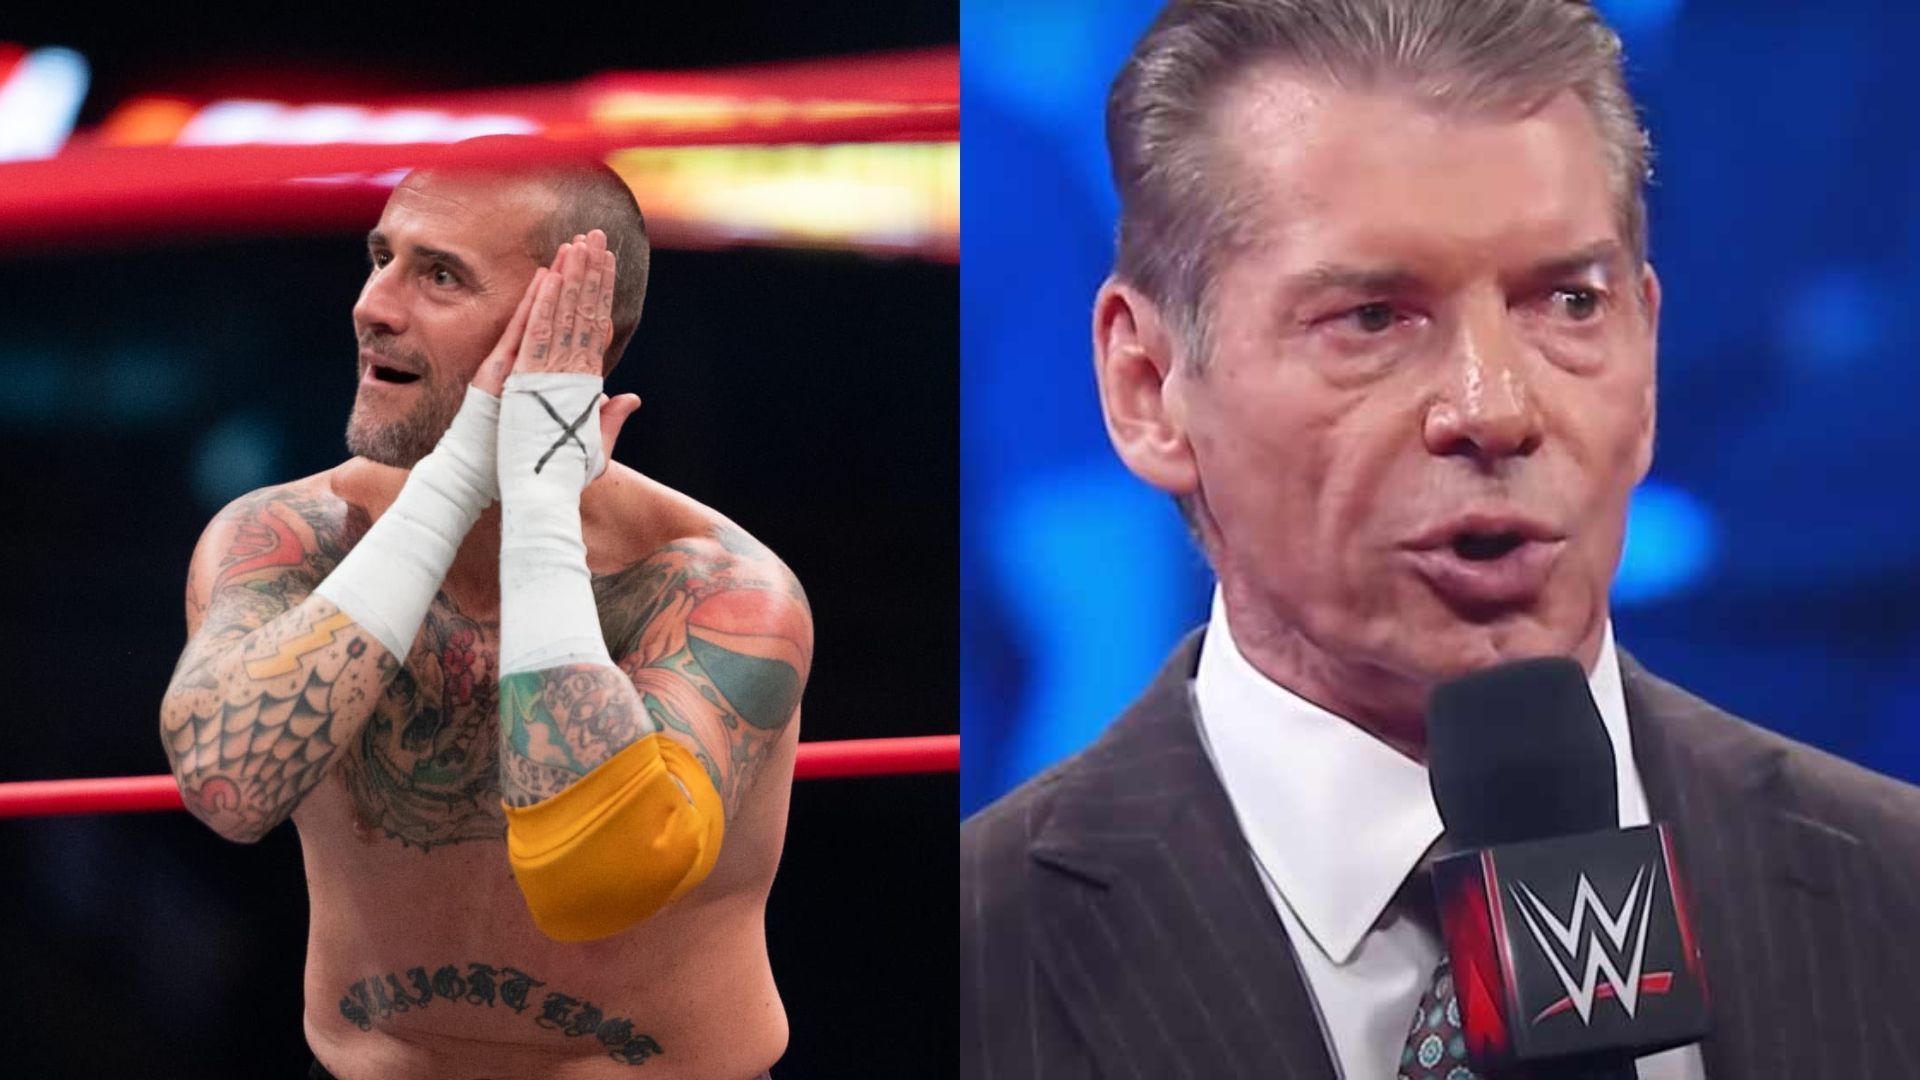 A reunion between CM Punk and WWE looks unlikely